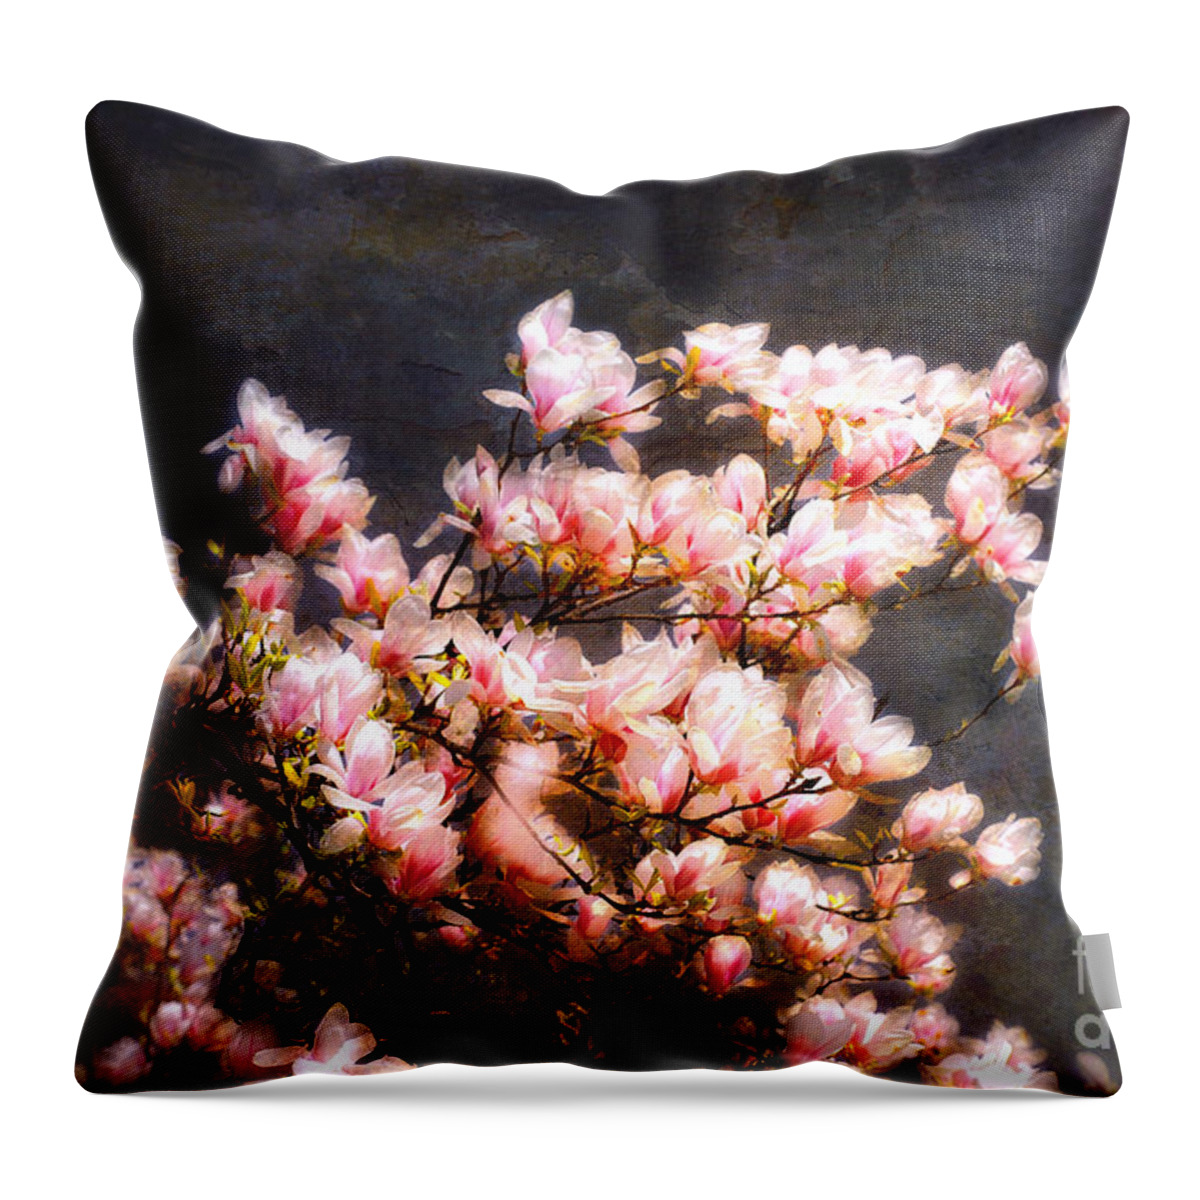 Flower Throw Pillow featuring the photograph Pink Magnolias by Elaine Manley